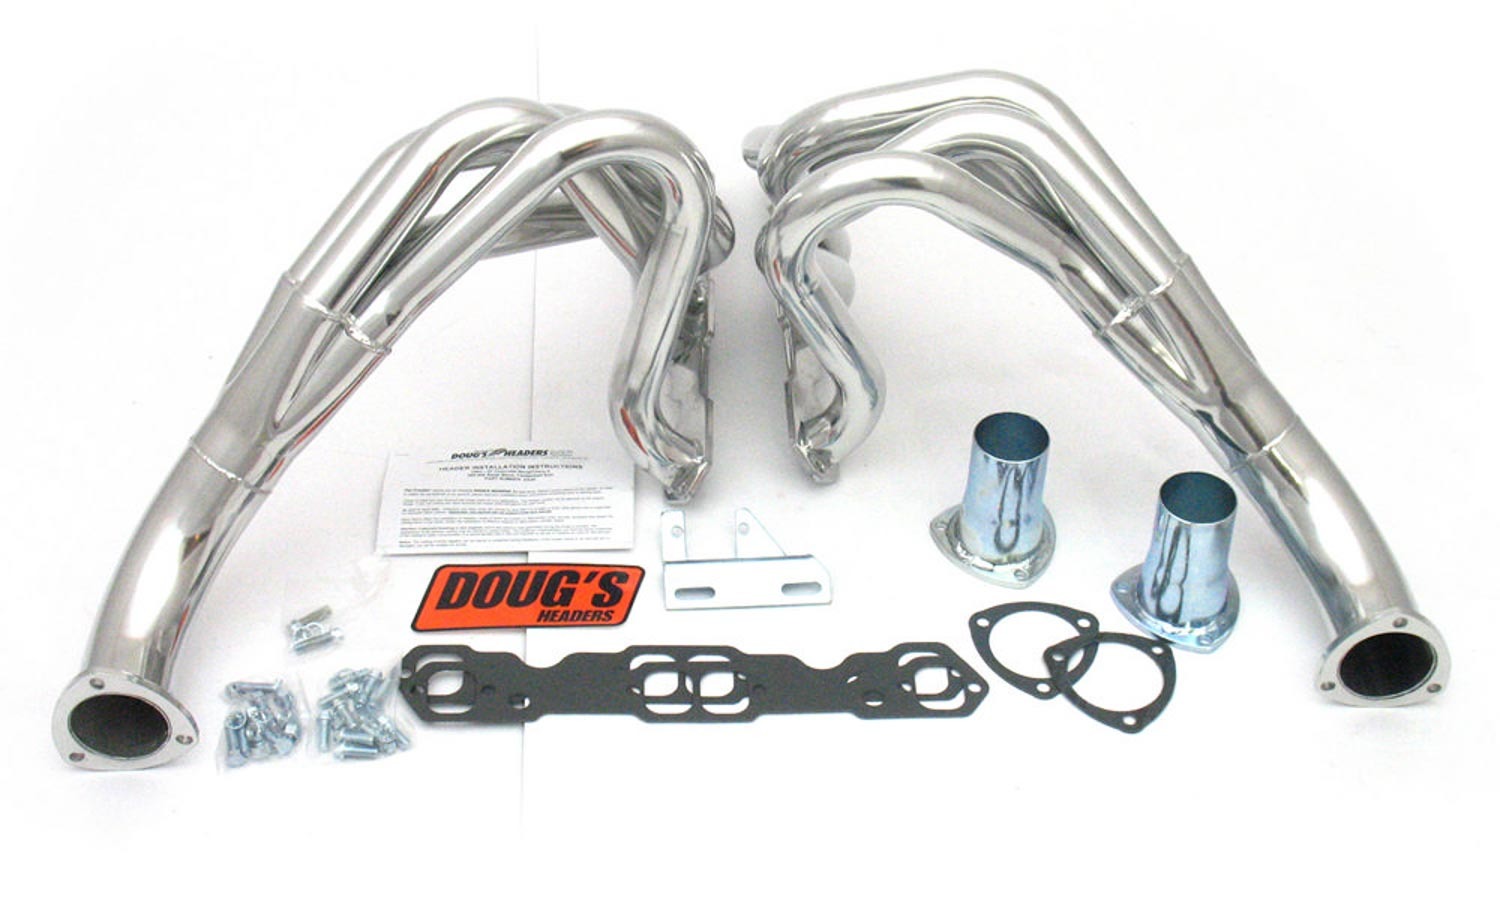 Dougs Headers D329 - Headers, Full Length, 1-3/4 in Primary, 3 in Collector, Steel, Ceramic, Small Block Chevy, GM X-Body 1967-69 / X-Body 1962-67, Kit